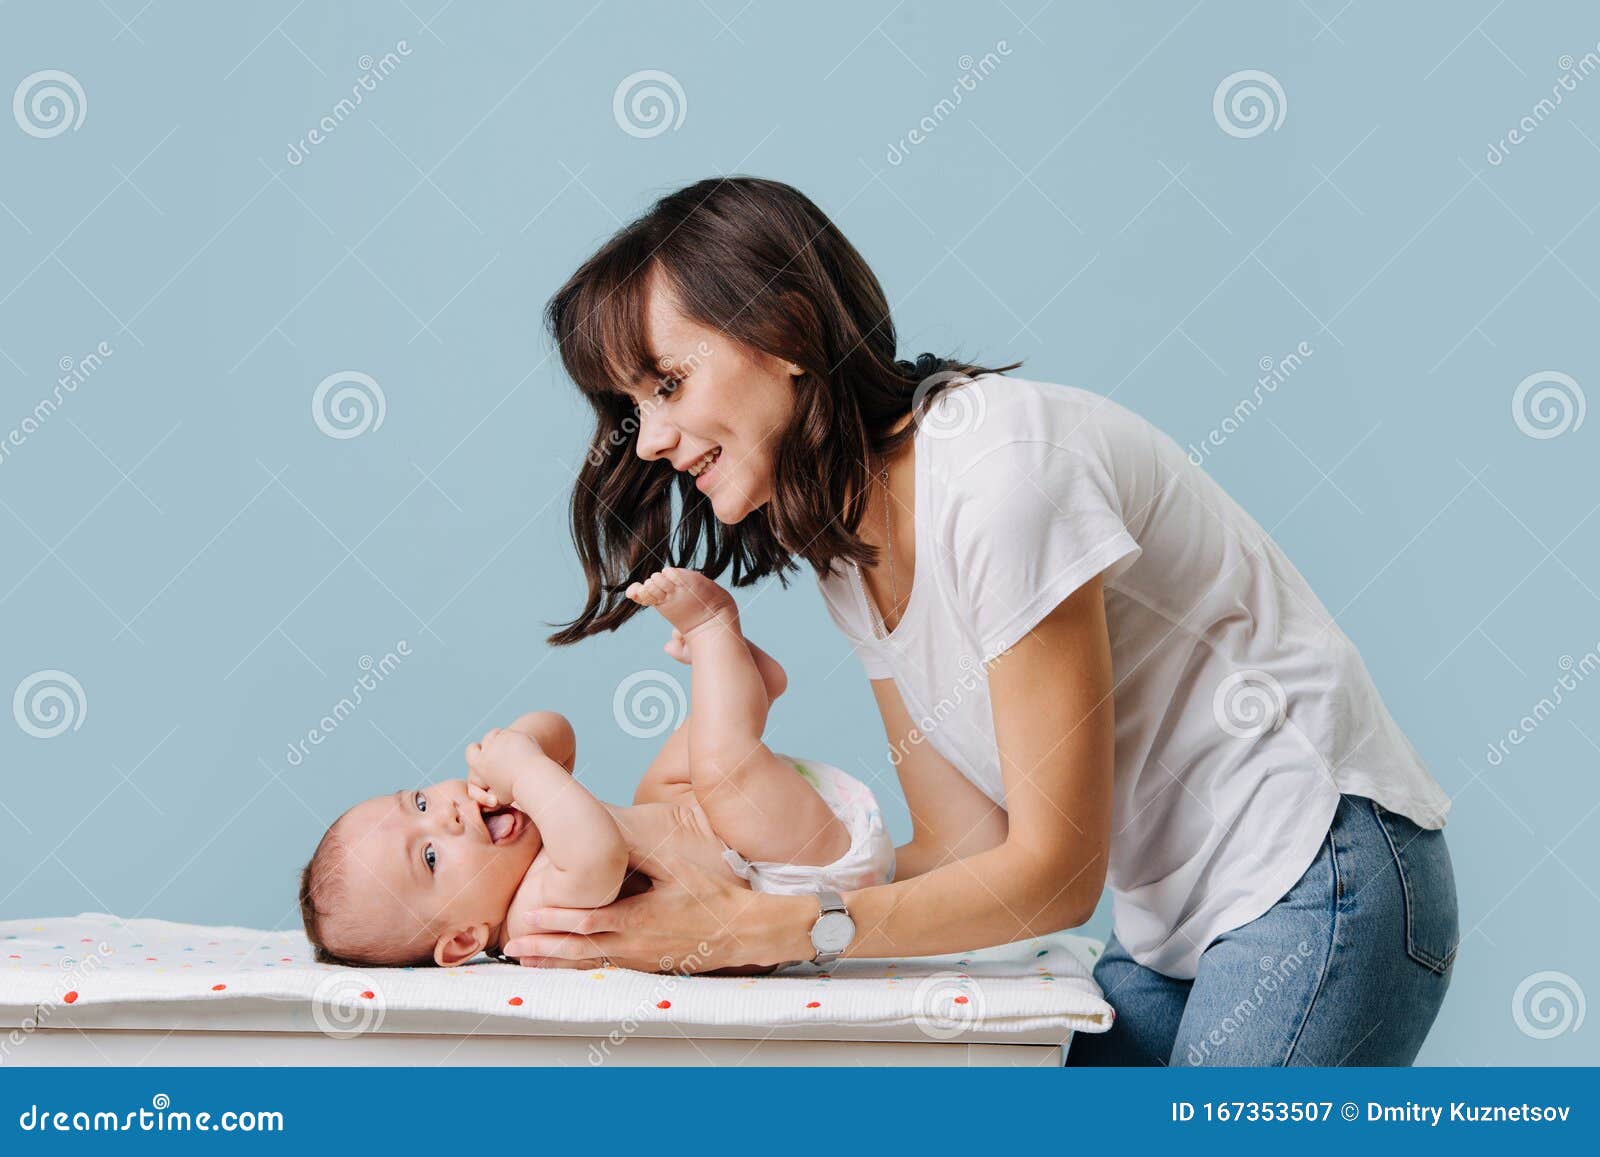 mother bent over her infant talking, caring and playing with him